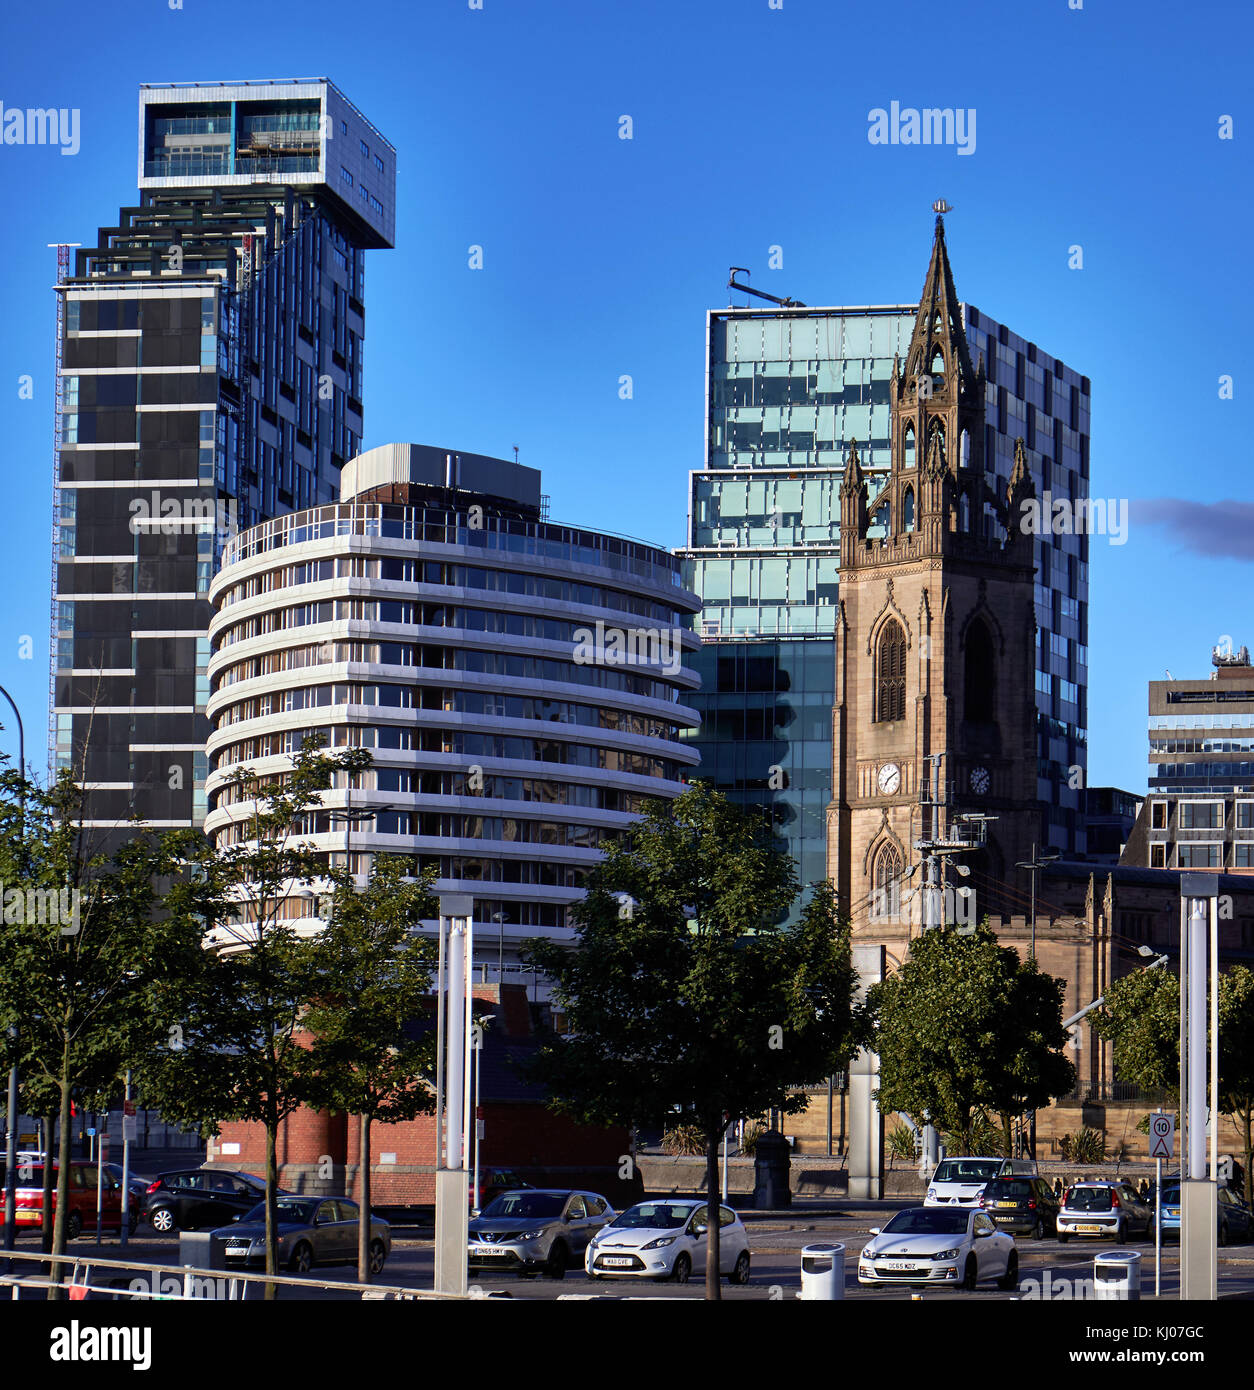 England, Liverpool Cityscape with St Nicholas church, the 20 Chapel building and the Mercure Liverpool Atlantic Tower on the image. The building known as 20 Chapel hosts companies like Liverpool F.C. or Ernst & Young. Stock Photo